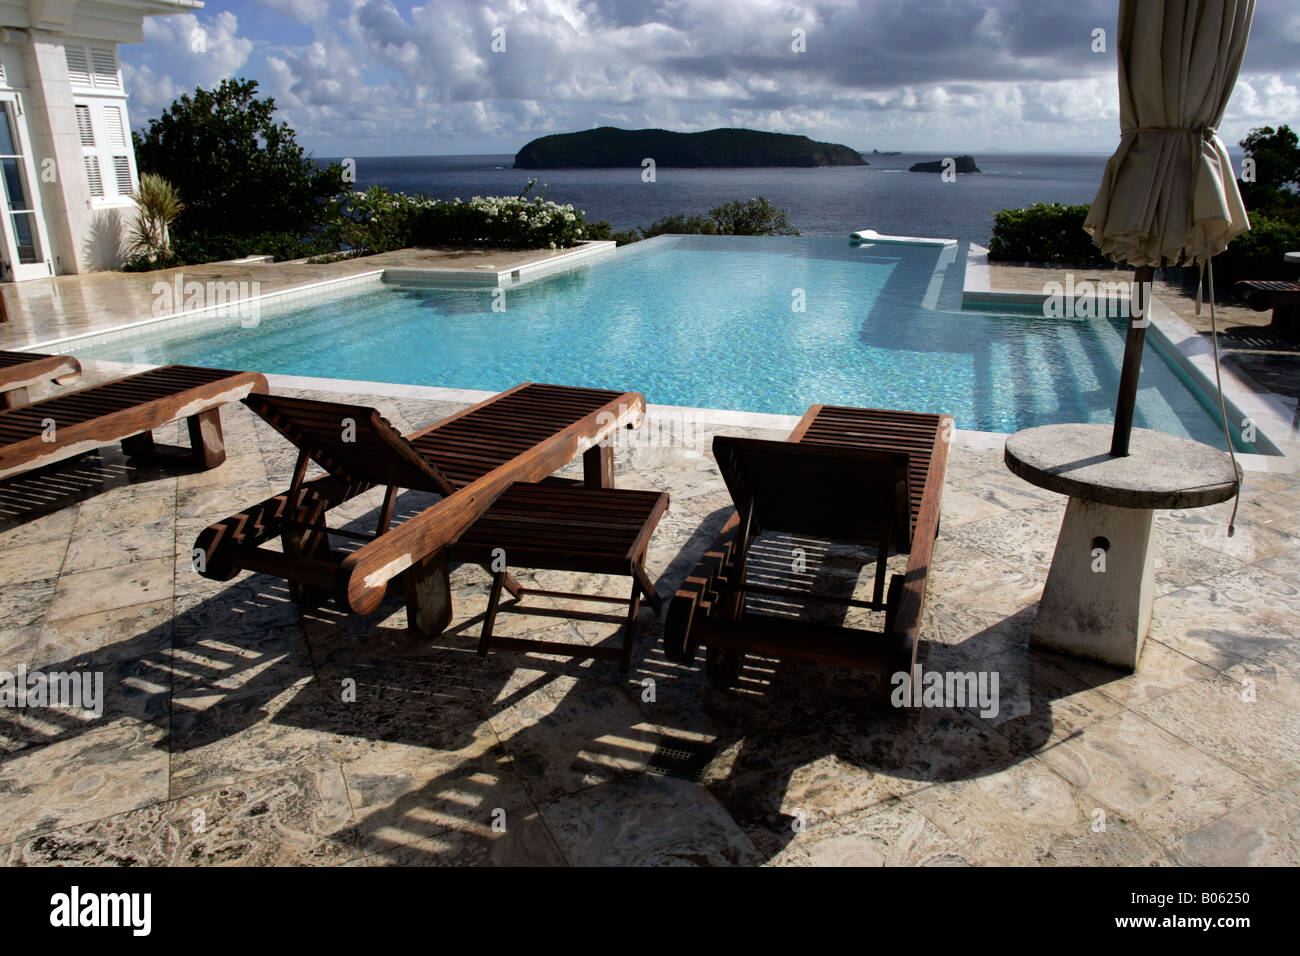 The infinity pool at Princess Margaret's former villa Les Jolies Eaux, Mustique, St. Vincent and the Grenadines. Stock Photo